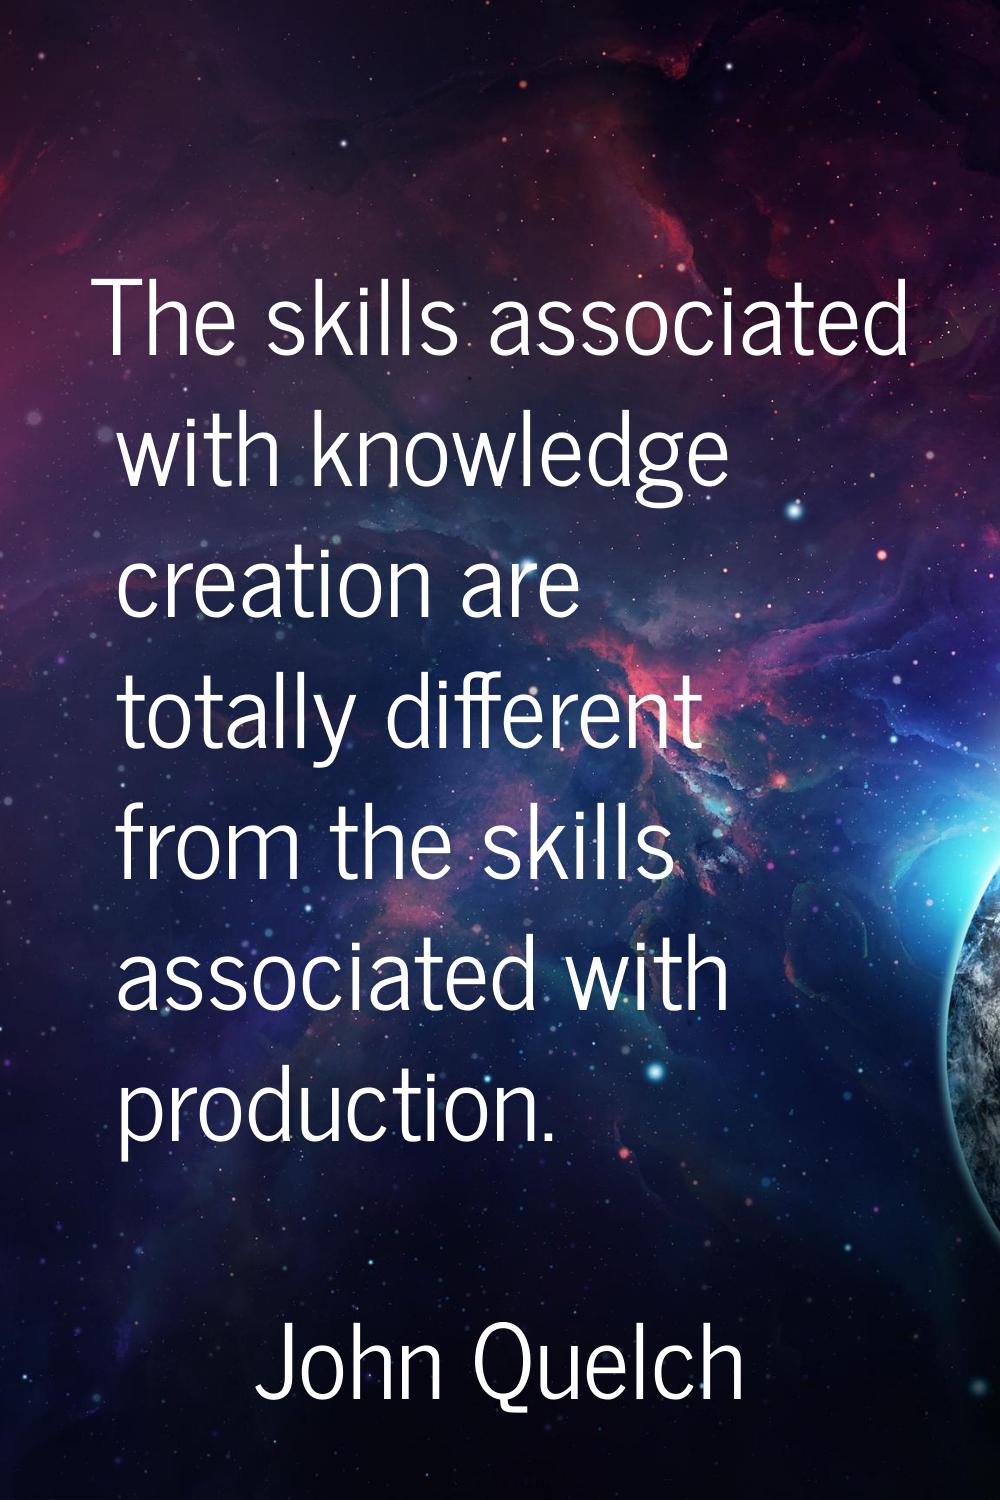 The skills associated with knowledge creation are totally different from the skills associated with